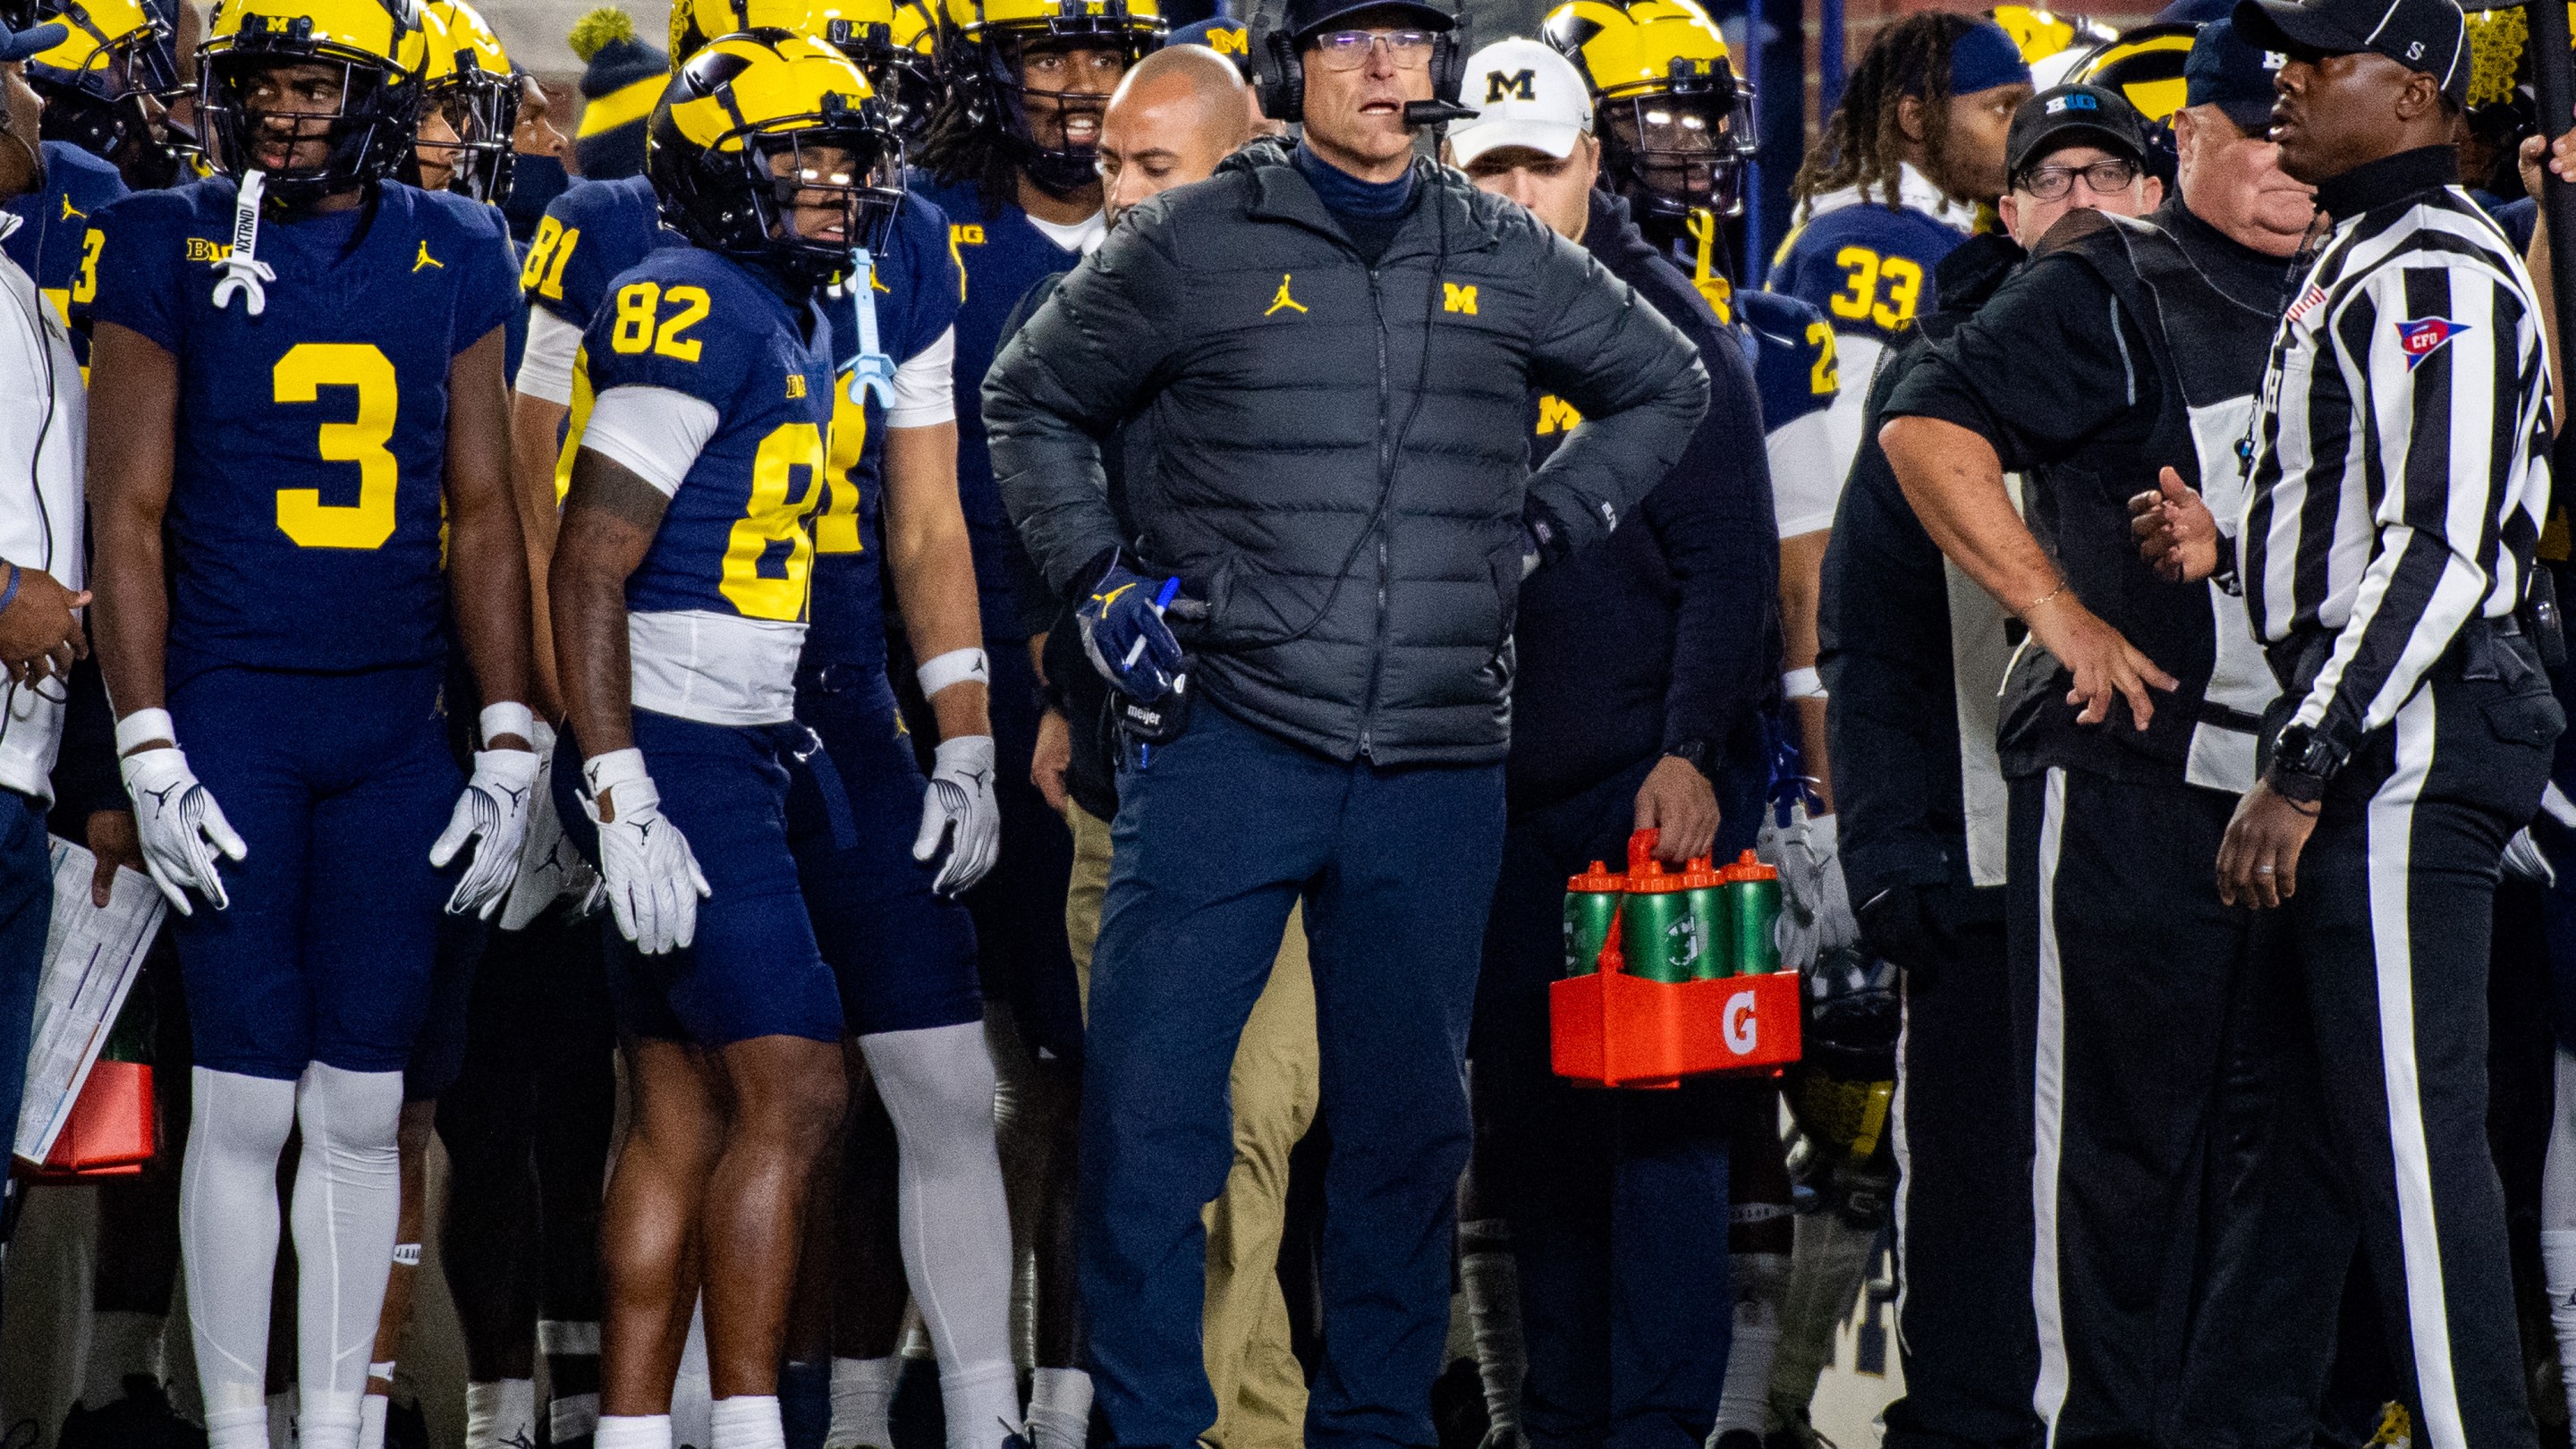 Head Football Coach Jim Harbaugh of the Michigan Wolverines is seen on the sideline during the first half a college football game against the Purdue Boilermakers at Michigan Stadium on November 04, 2023 in Ann Arbor, Michigan.